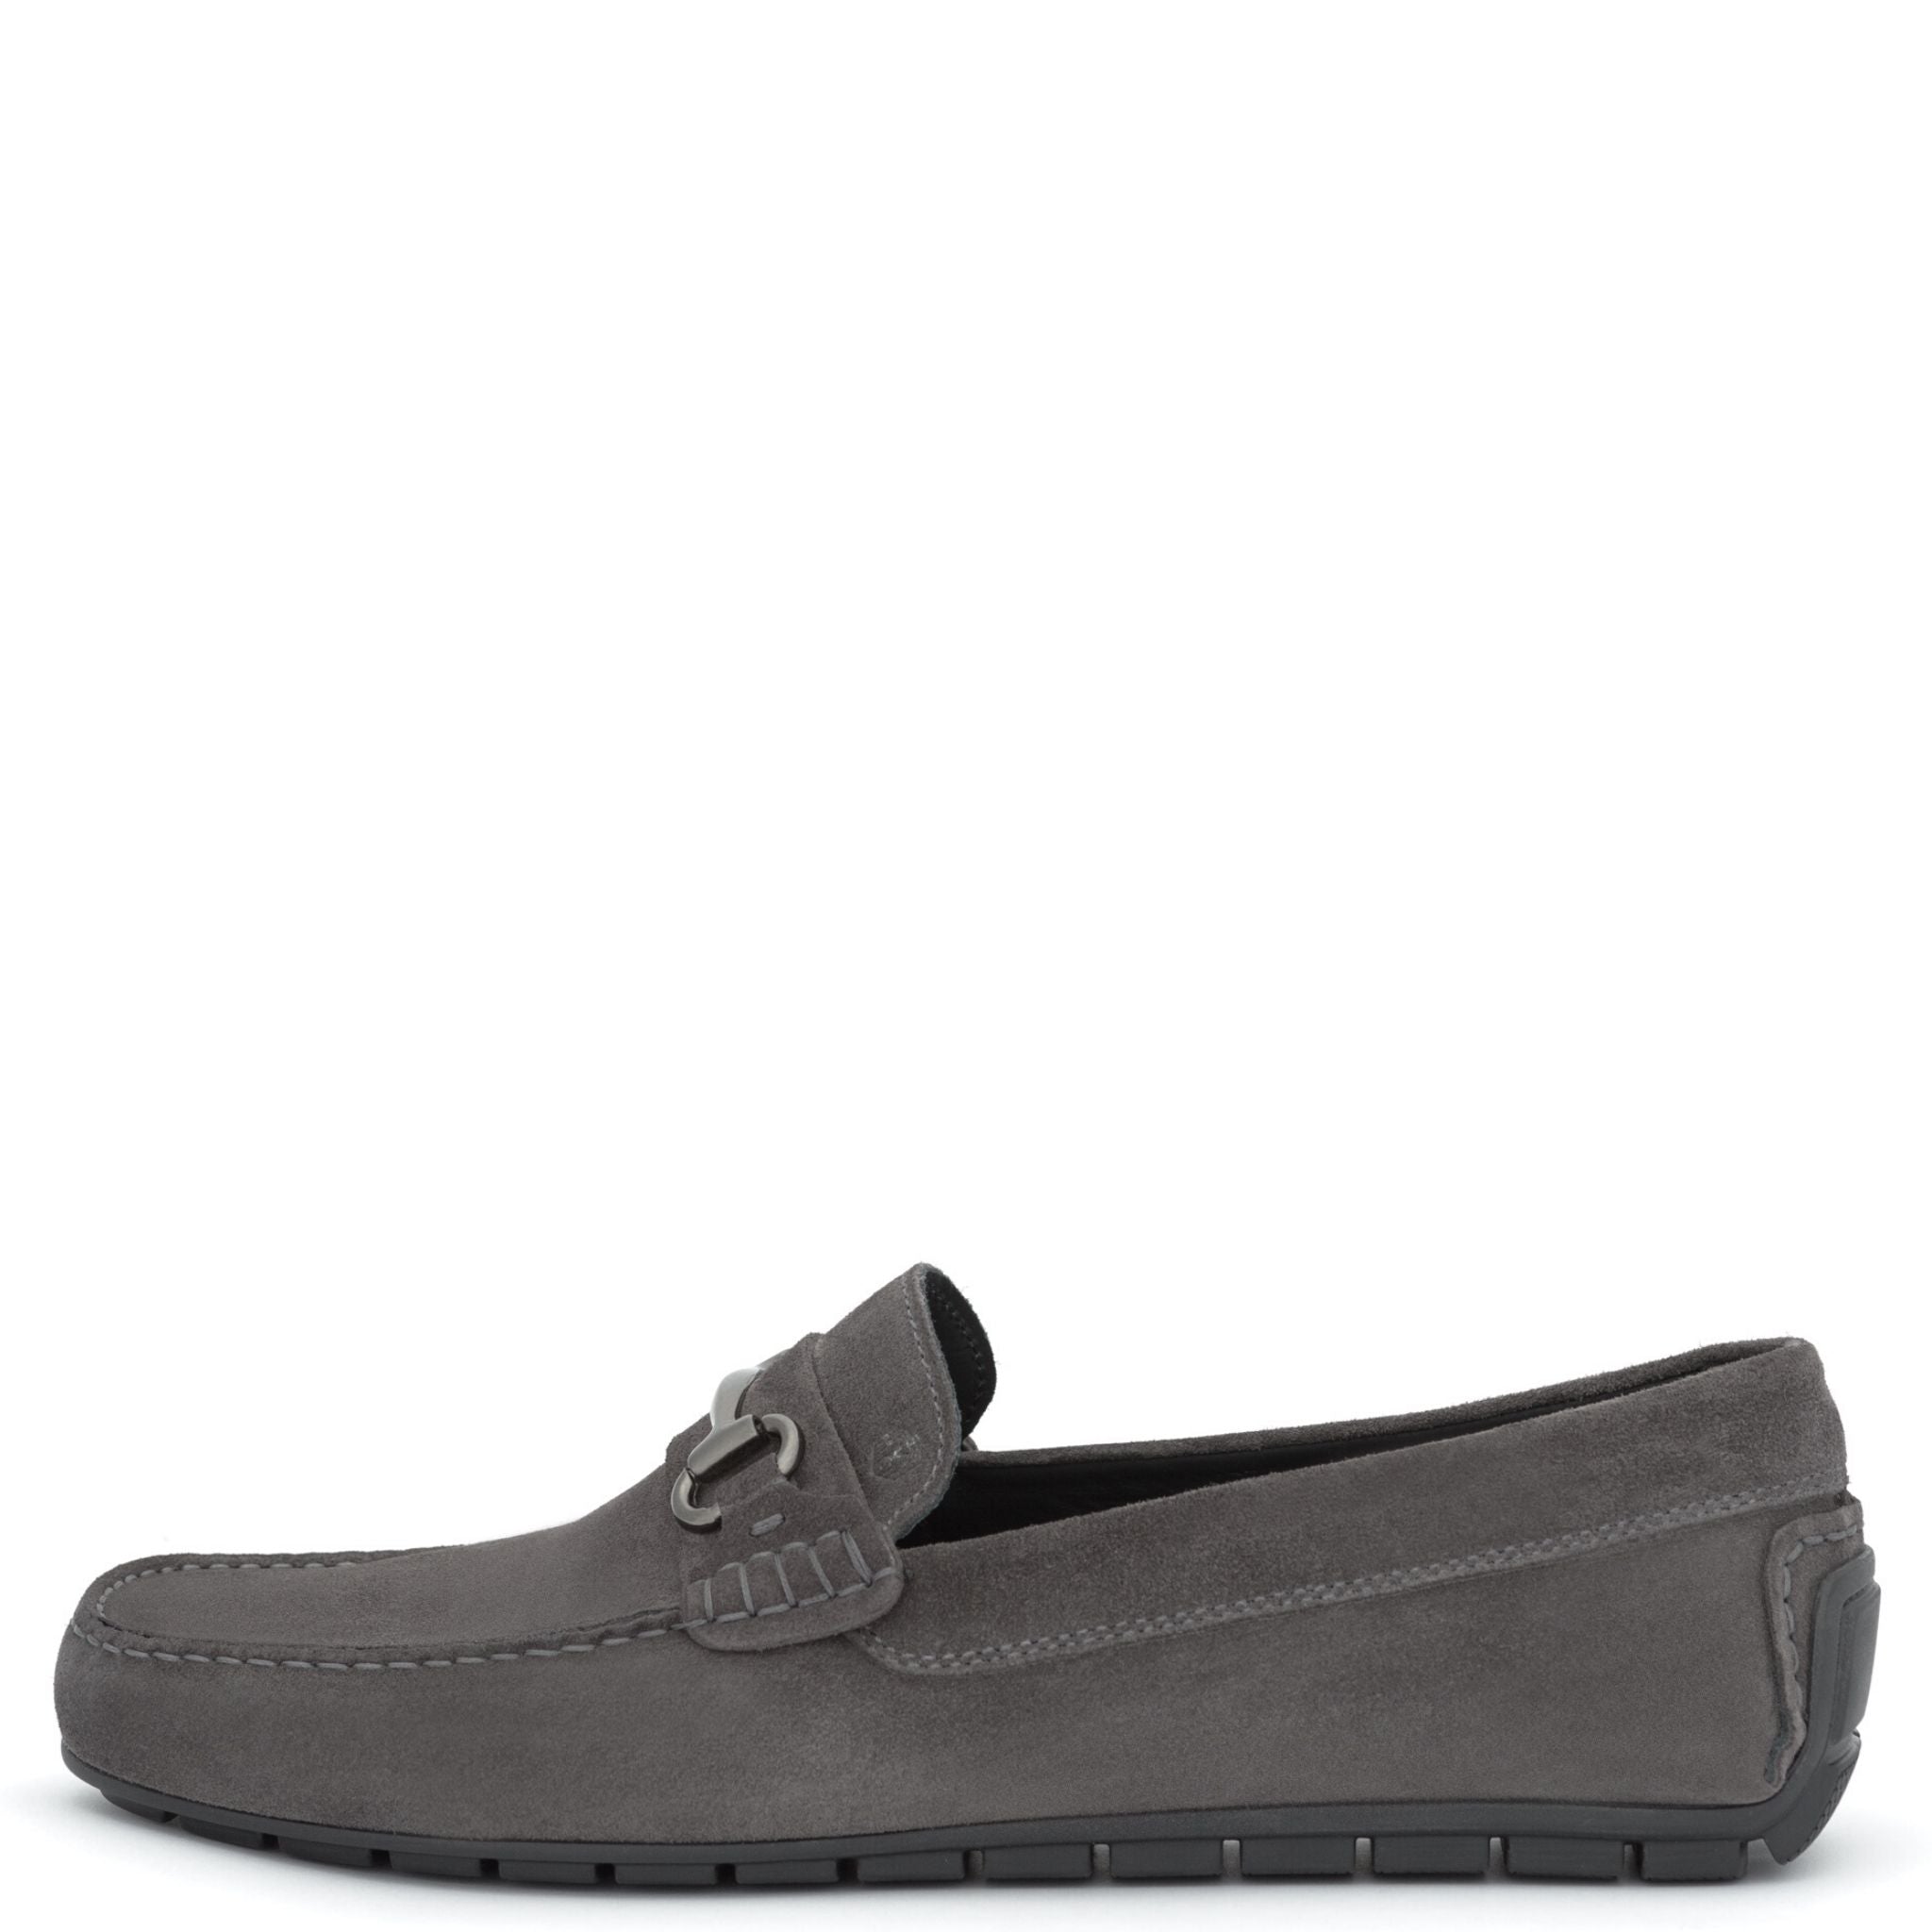 suede moccasin shoes